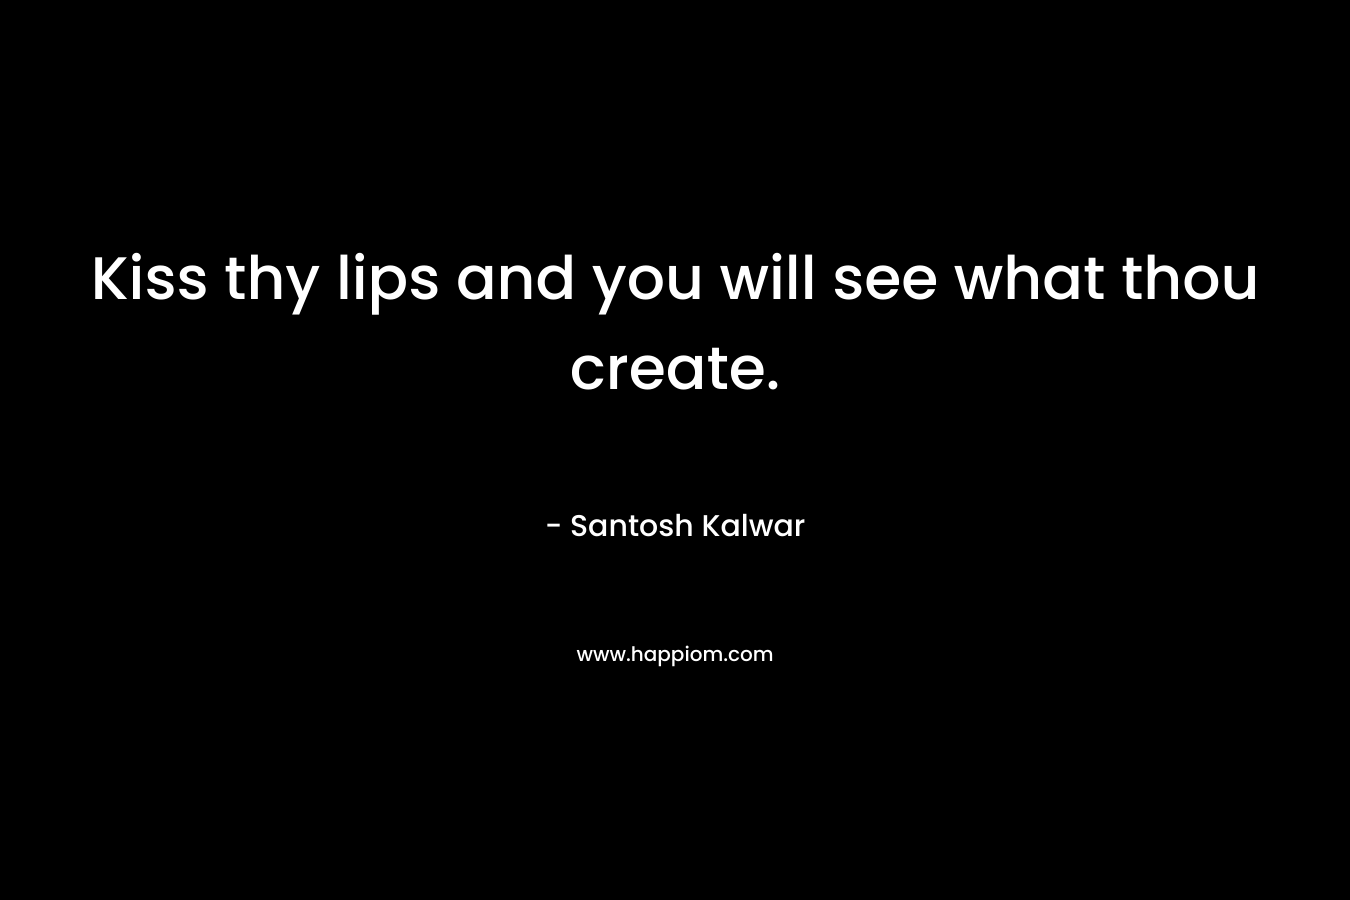 Kiss thy lips and you will see what thou create.